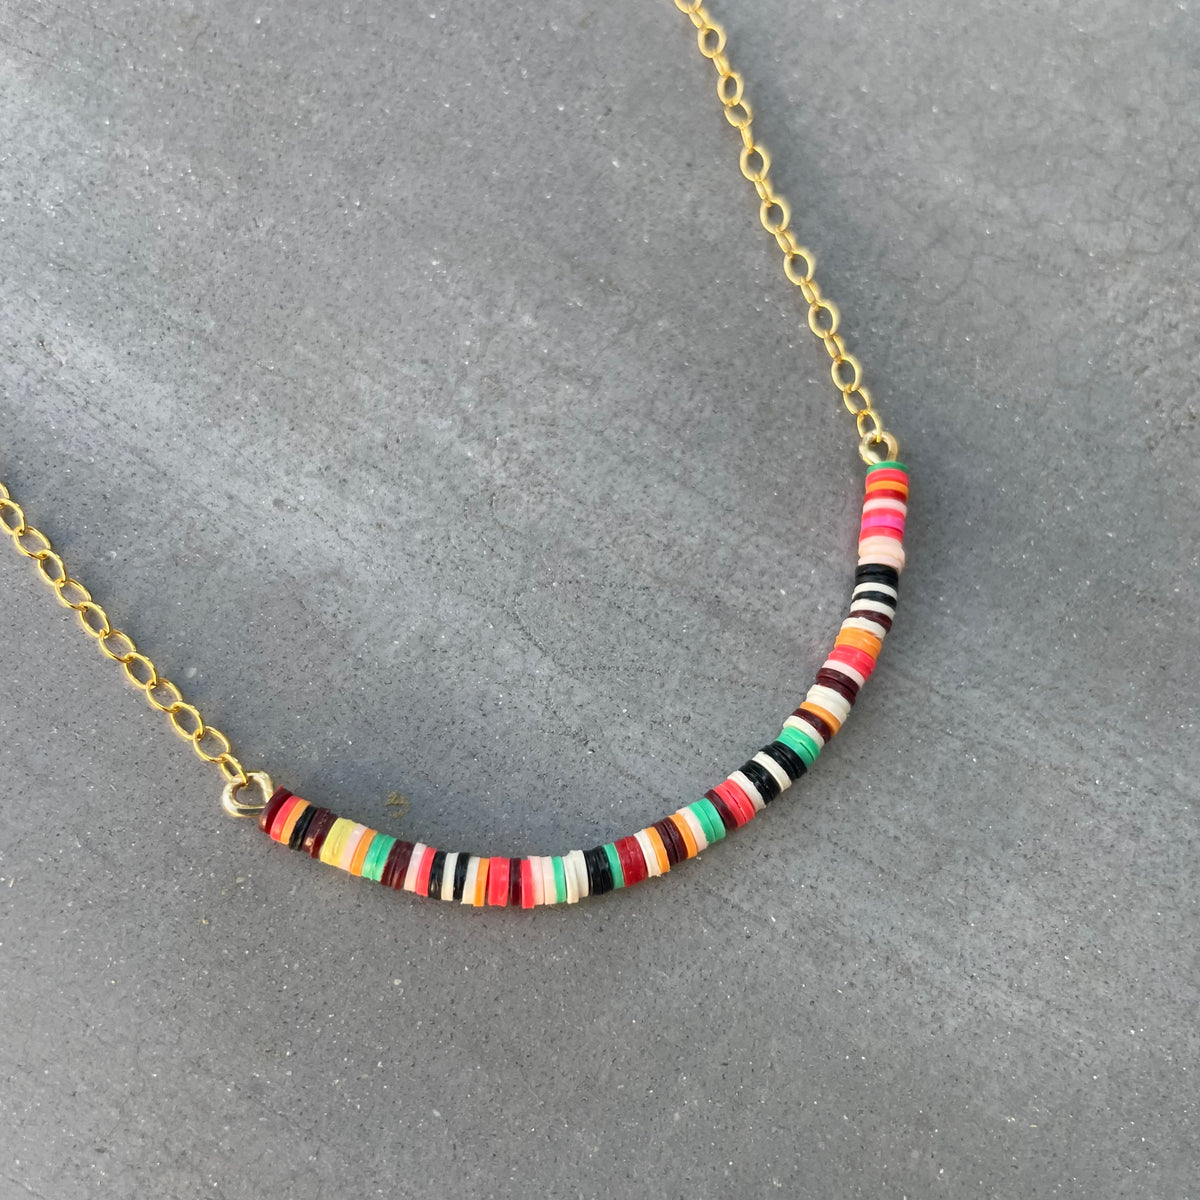 Multicolored Necklace IX / 14K Gold-Filled